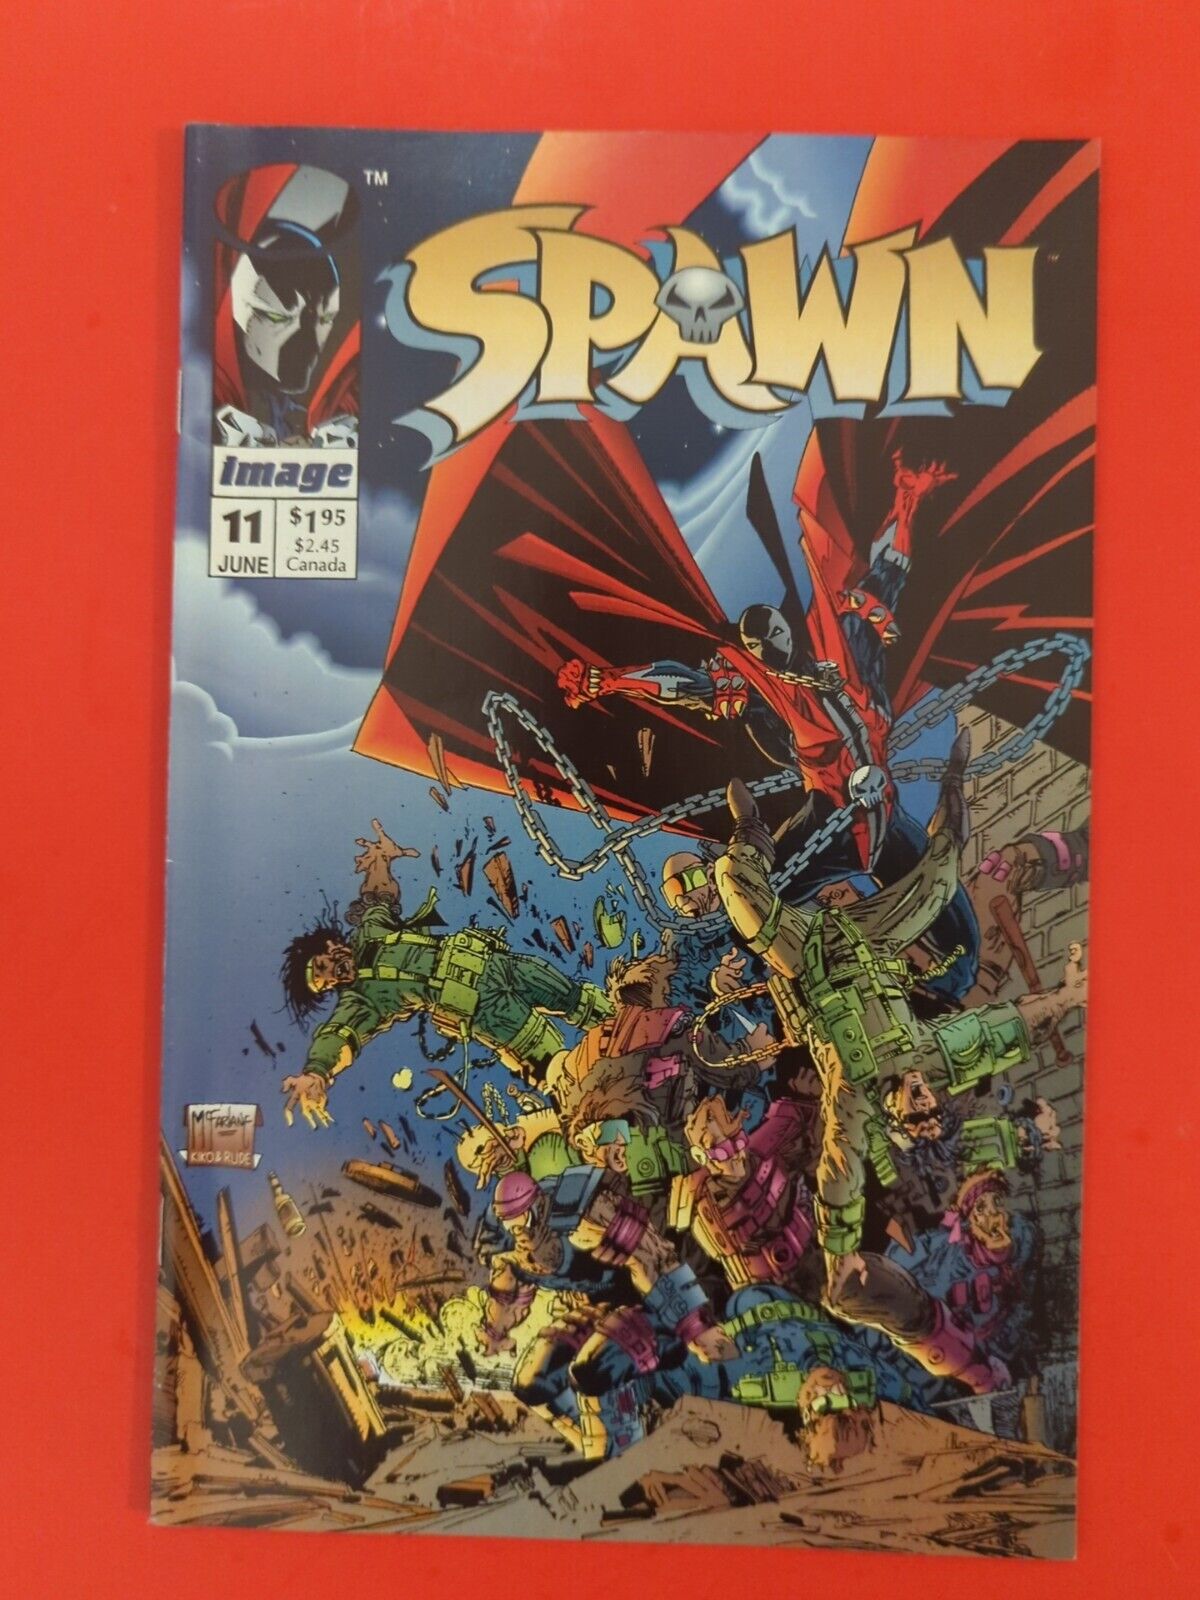 🔥SPAWN #11 1st BOOTS 1992 Image STORY by FRANK MILLER+INSERT+TMcF (L2)